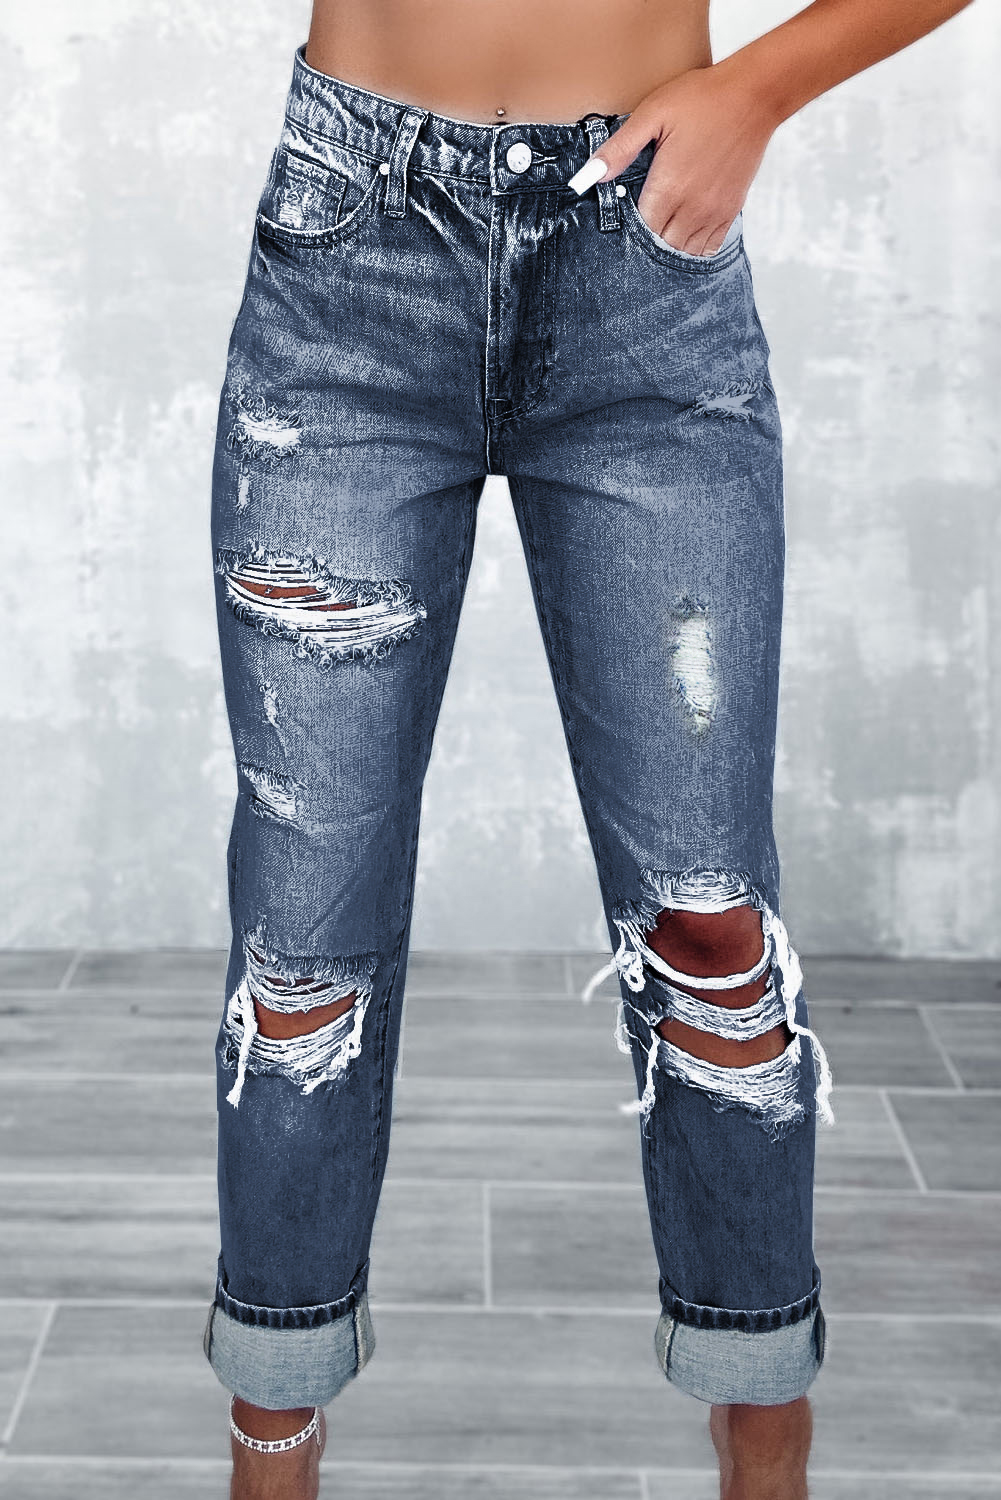 Shewin Wholesale High Quality Navy Blue Light Wash Frayed Slim Fit High Waist JEANS